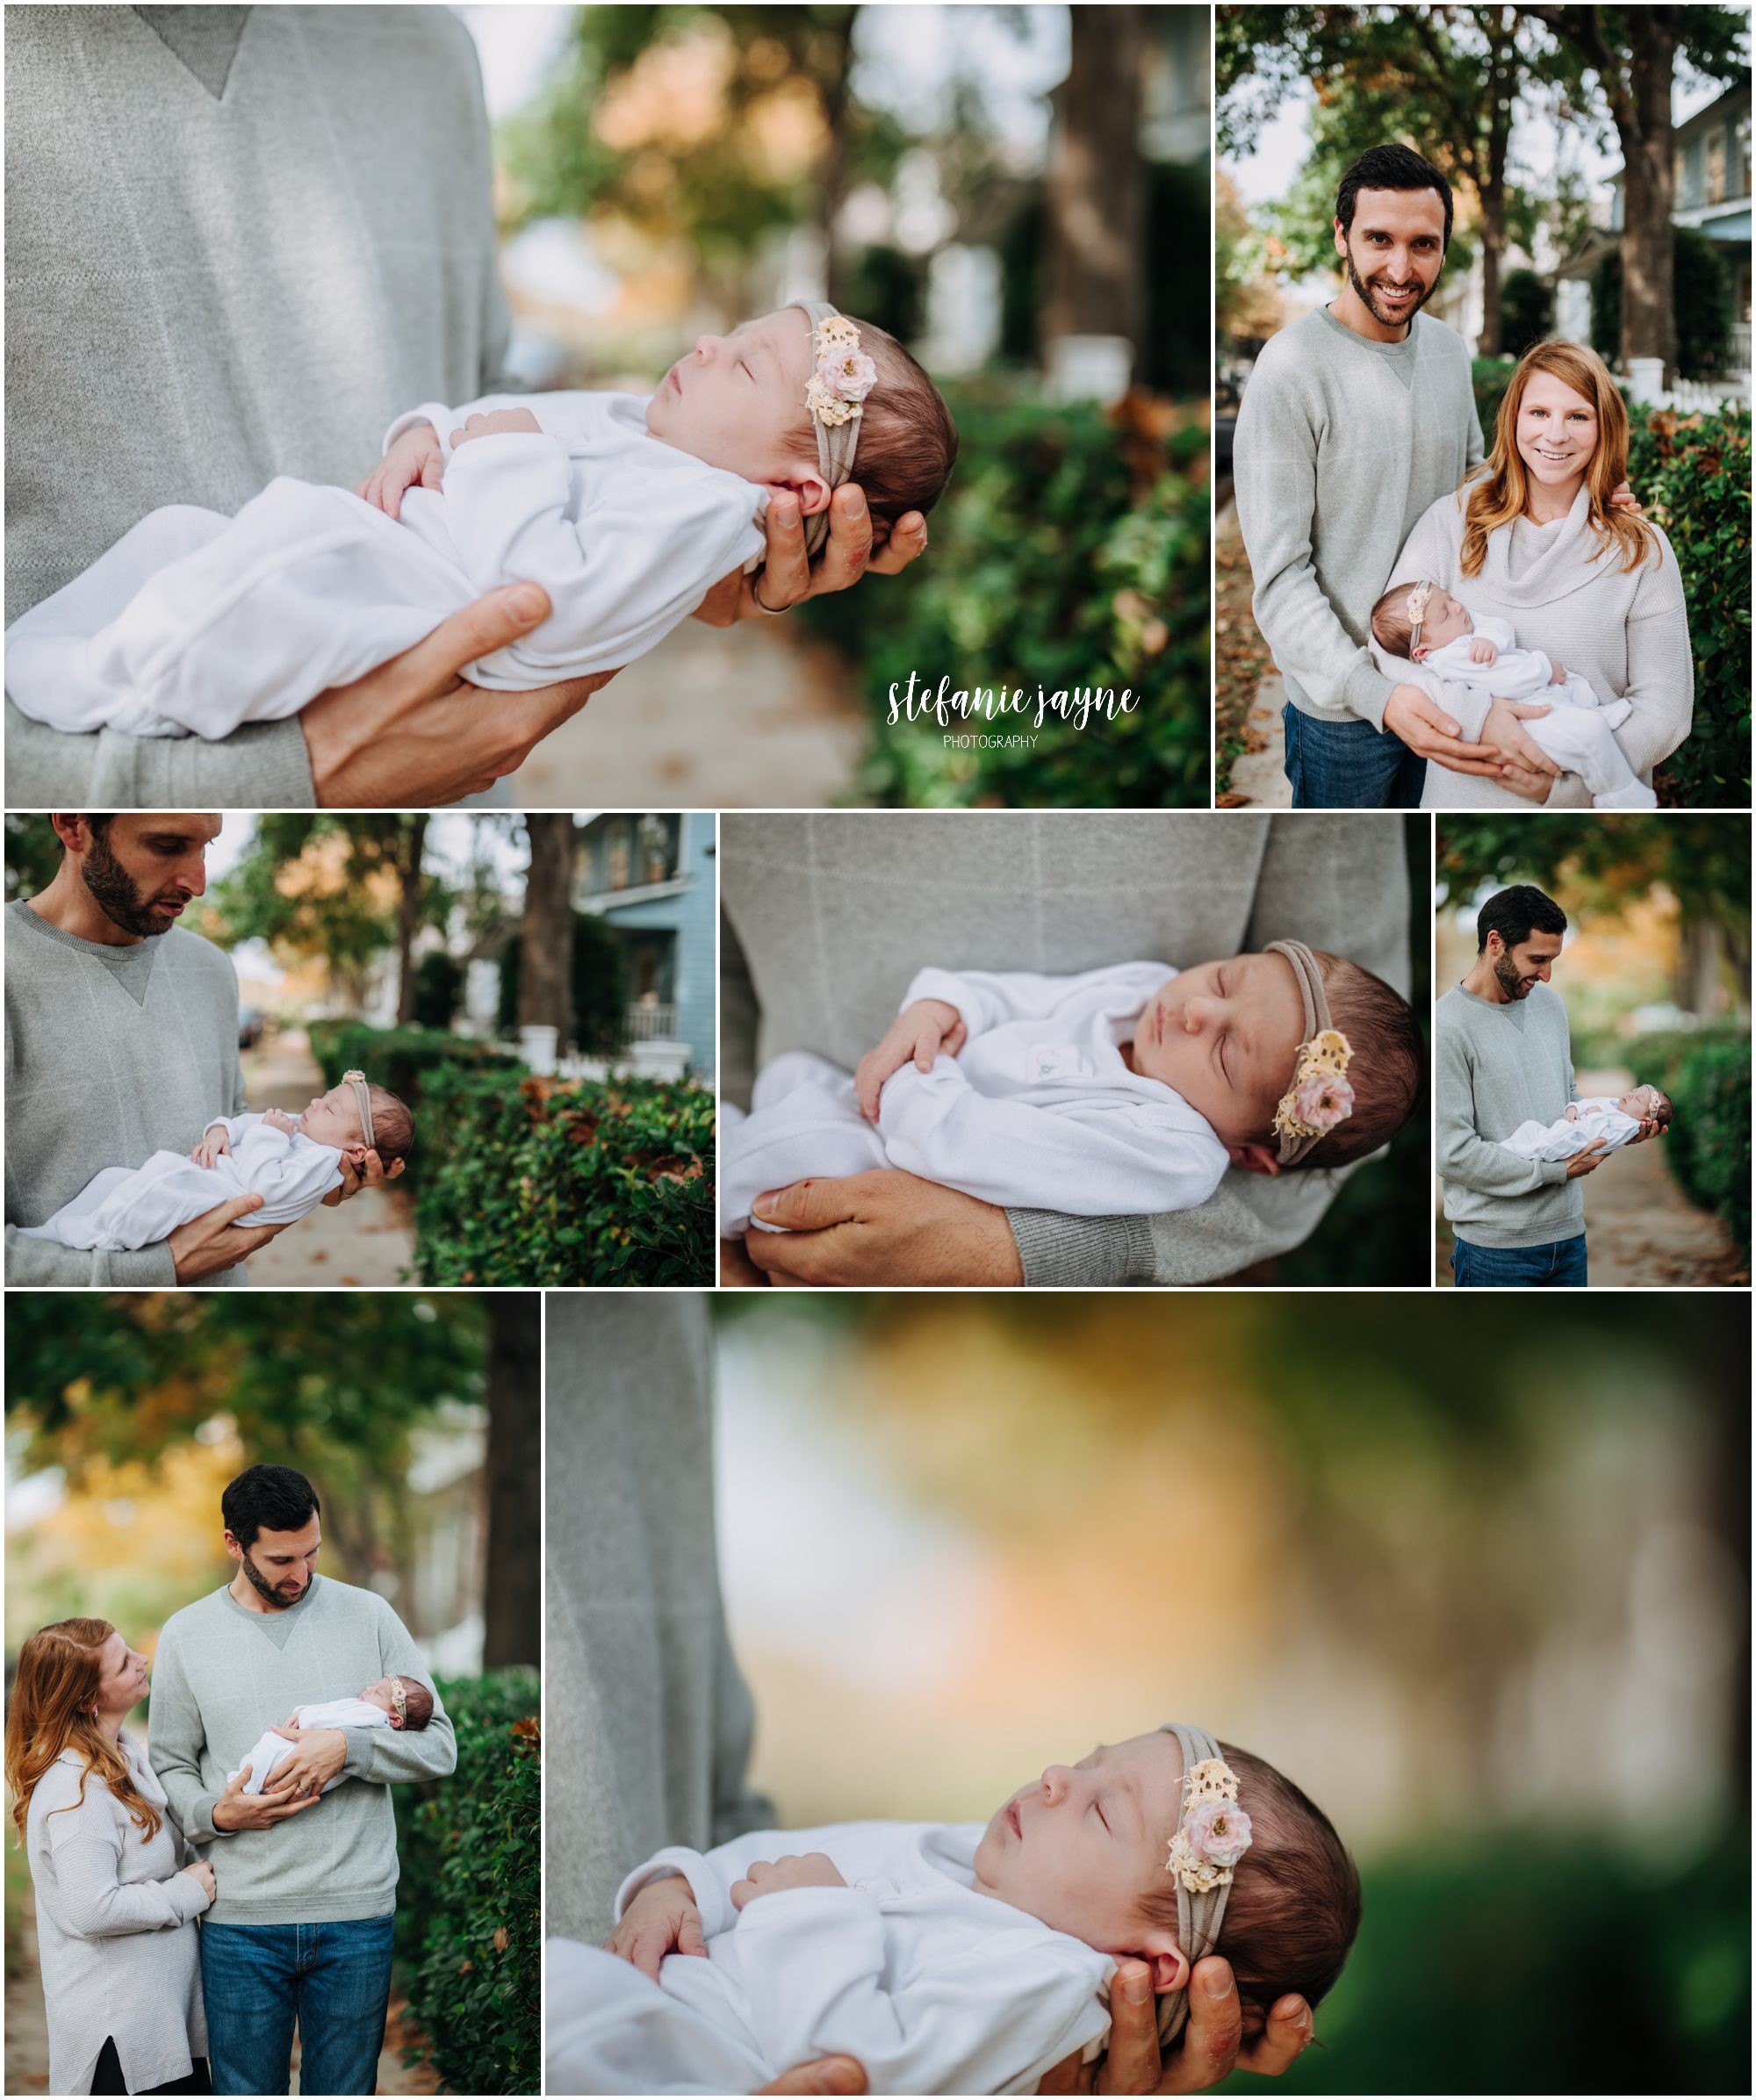 in-home baby photographer Johns Creek